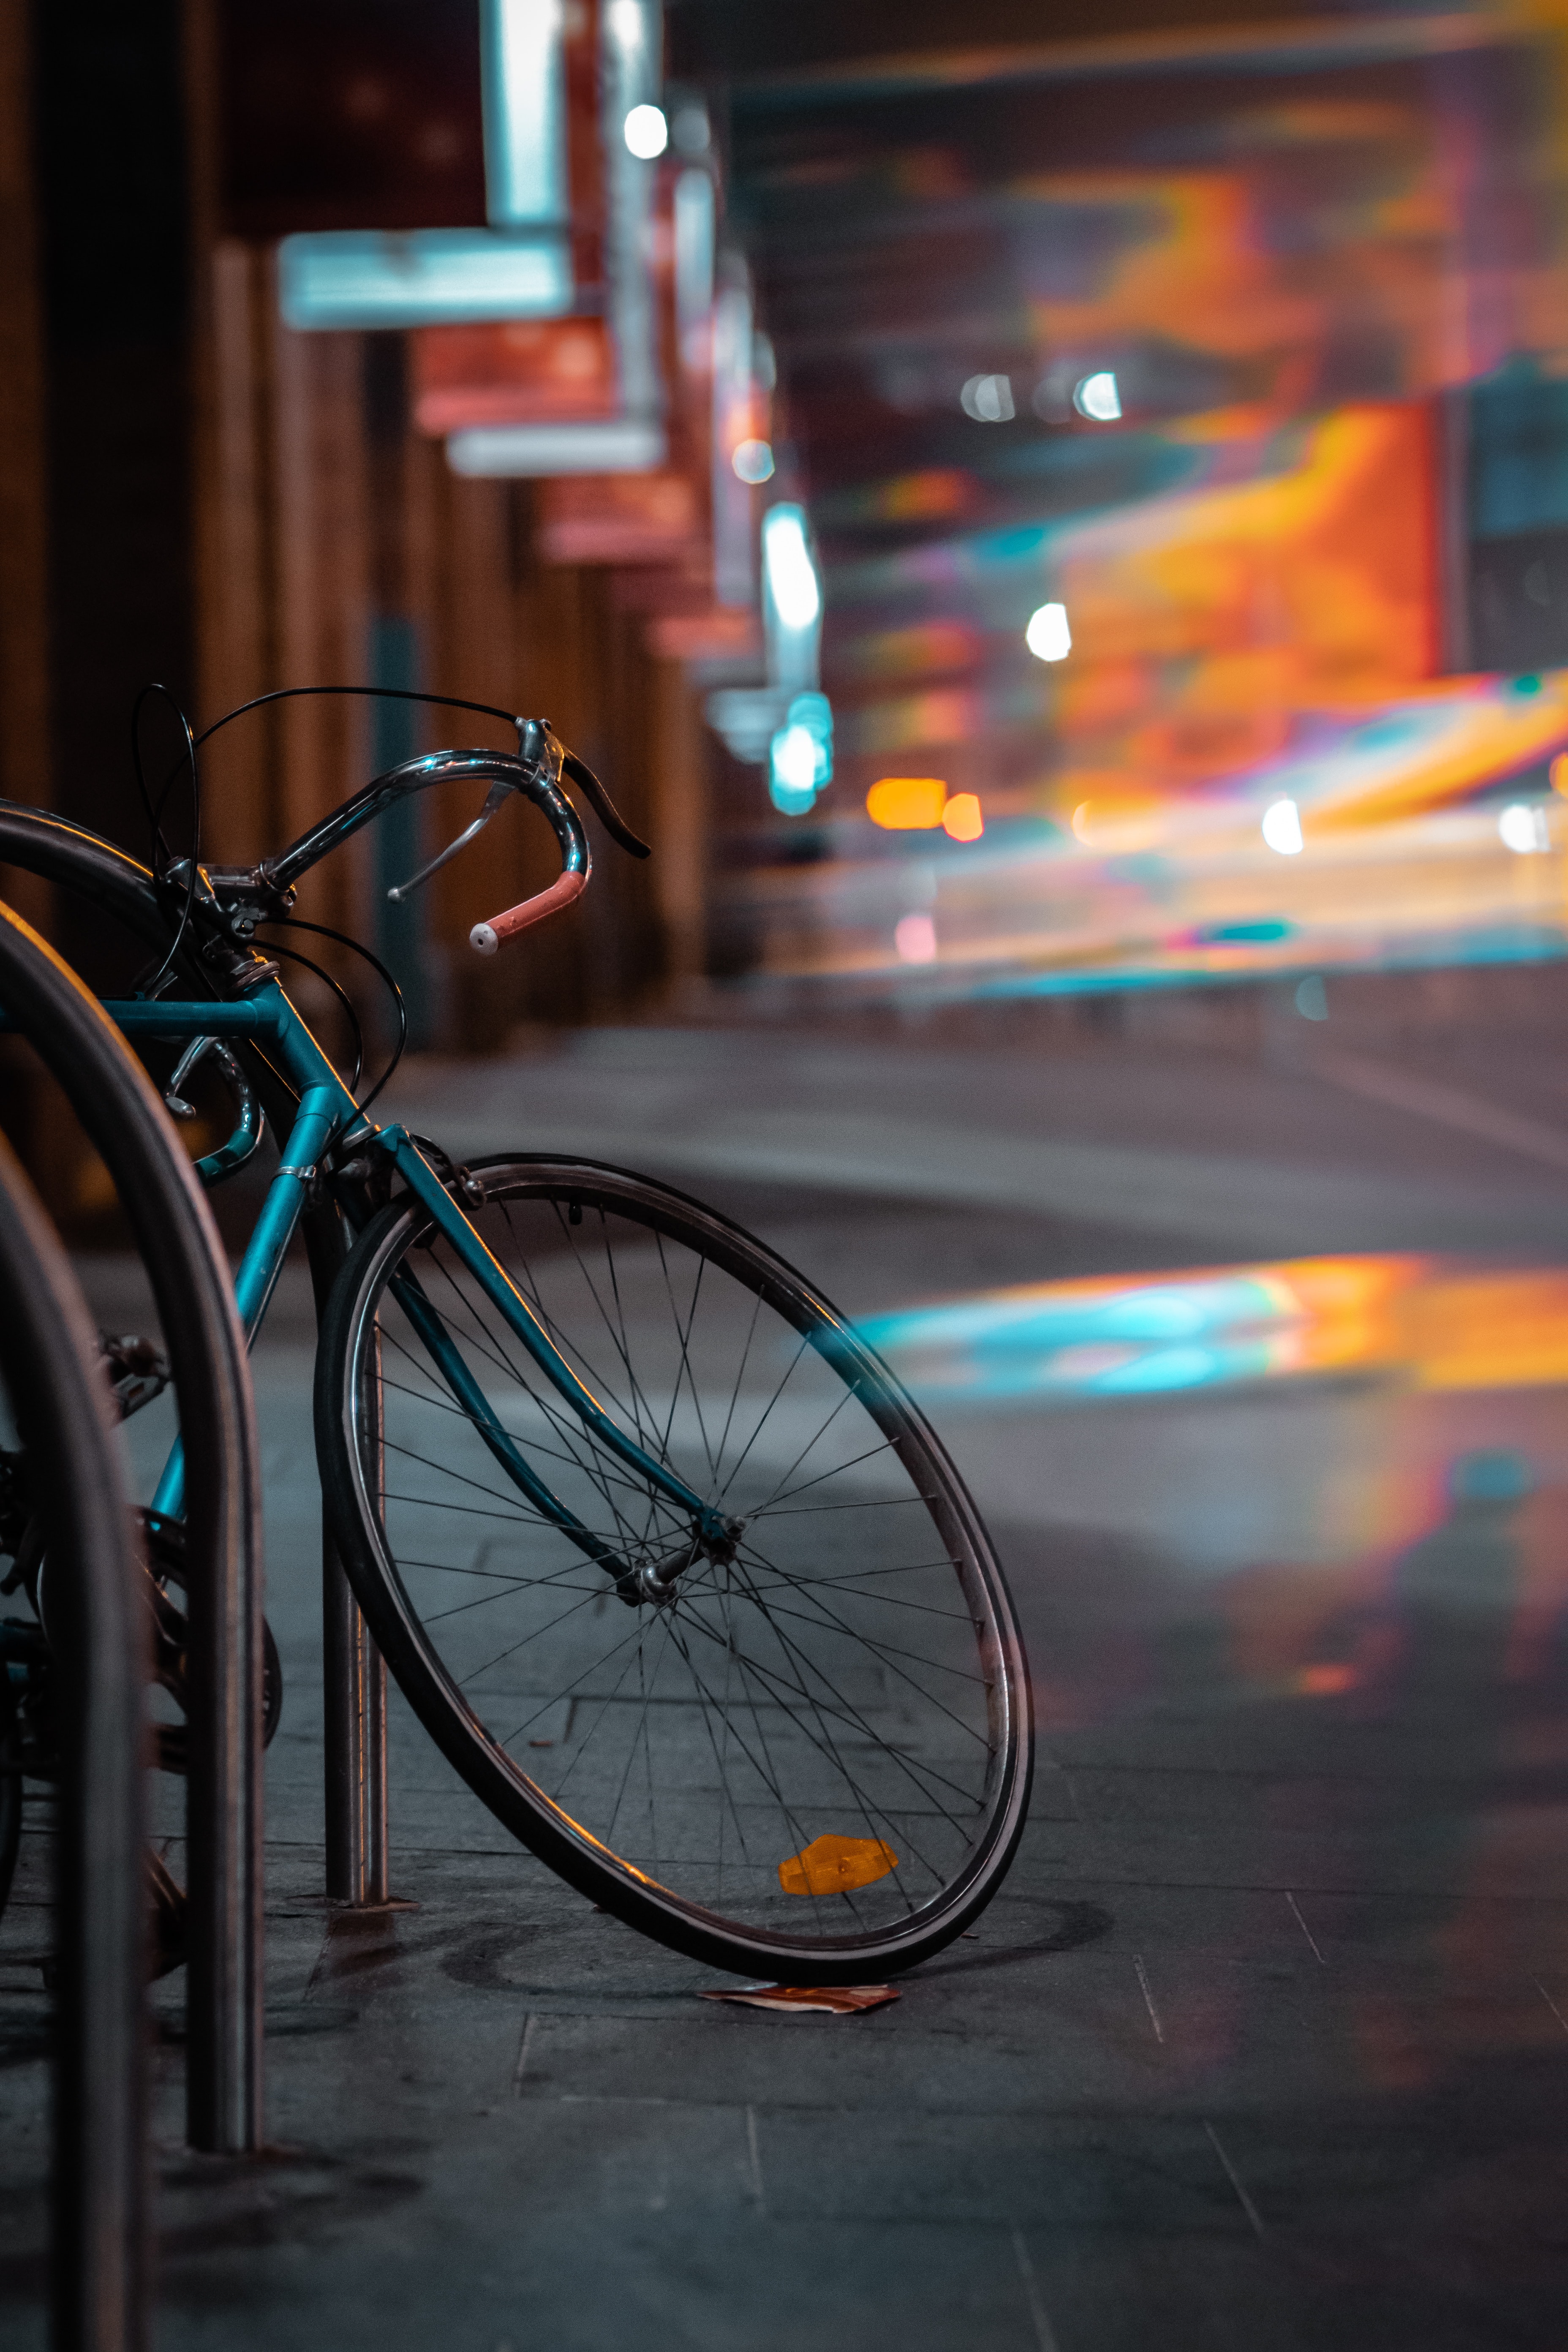 blur, miscellaneous, bicycle, transport, glare, miscellanea, smooth, evening, wheels UHD